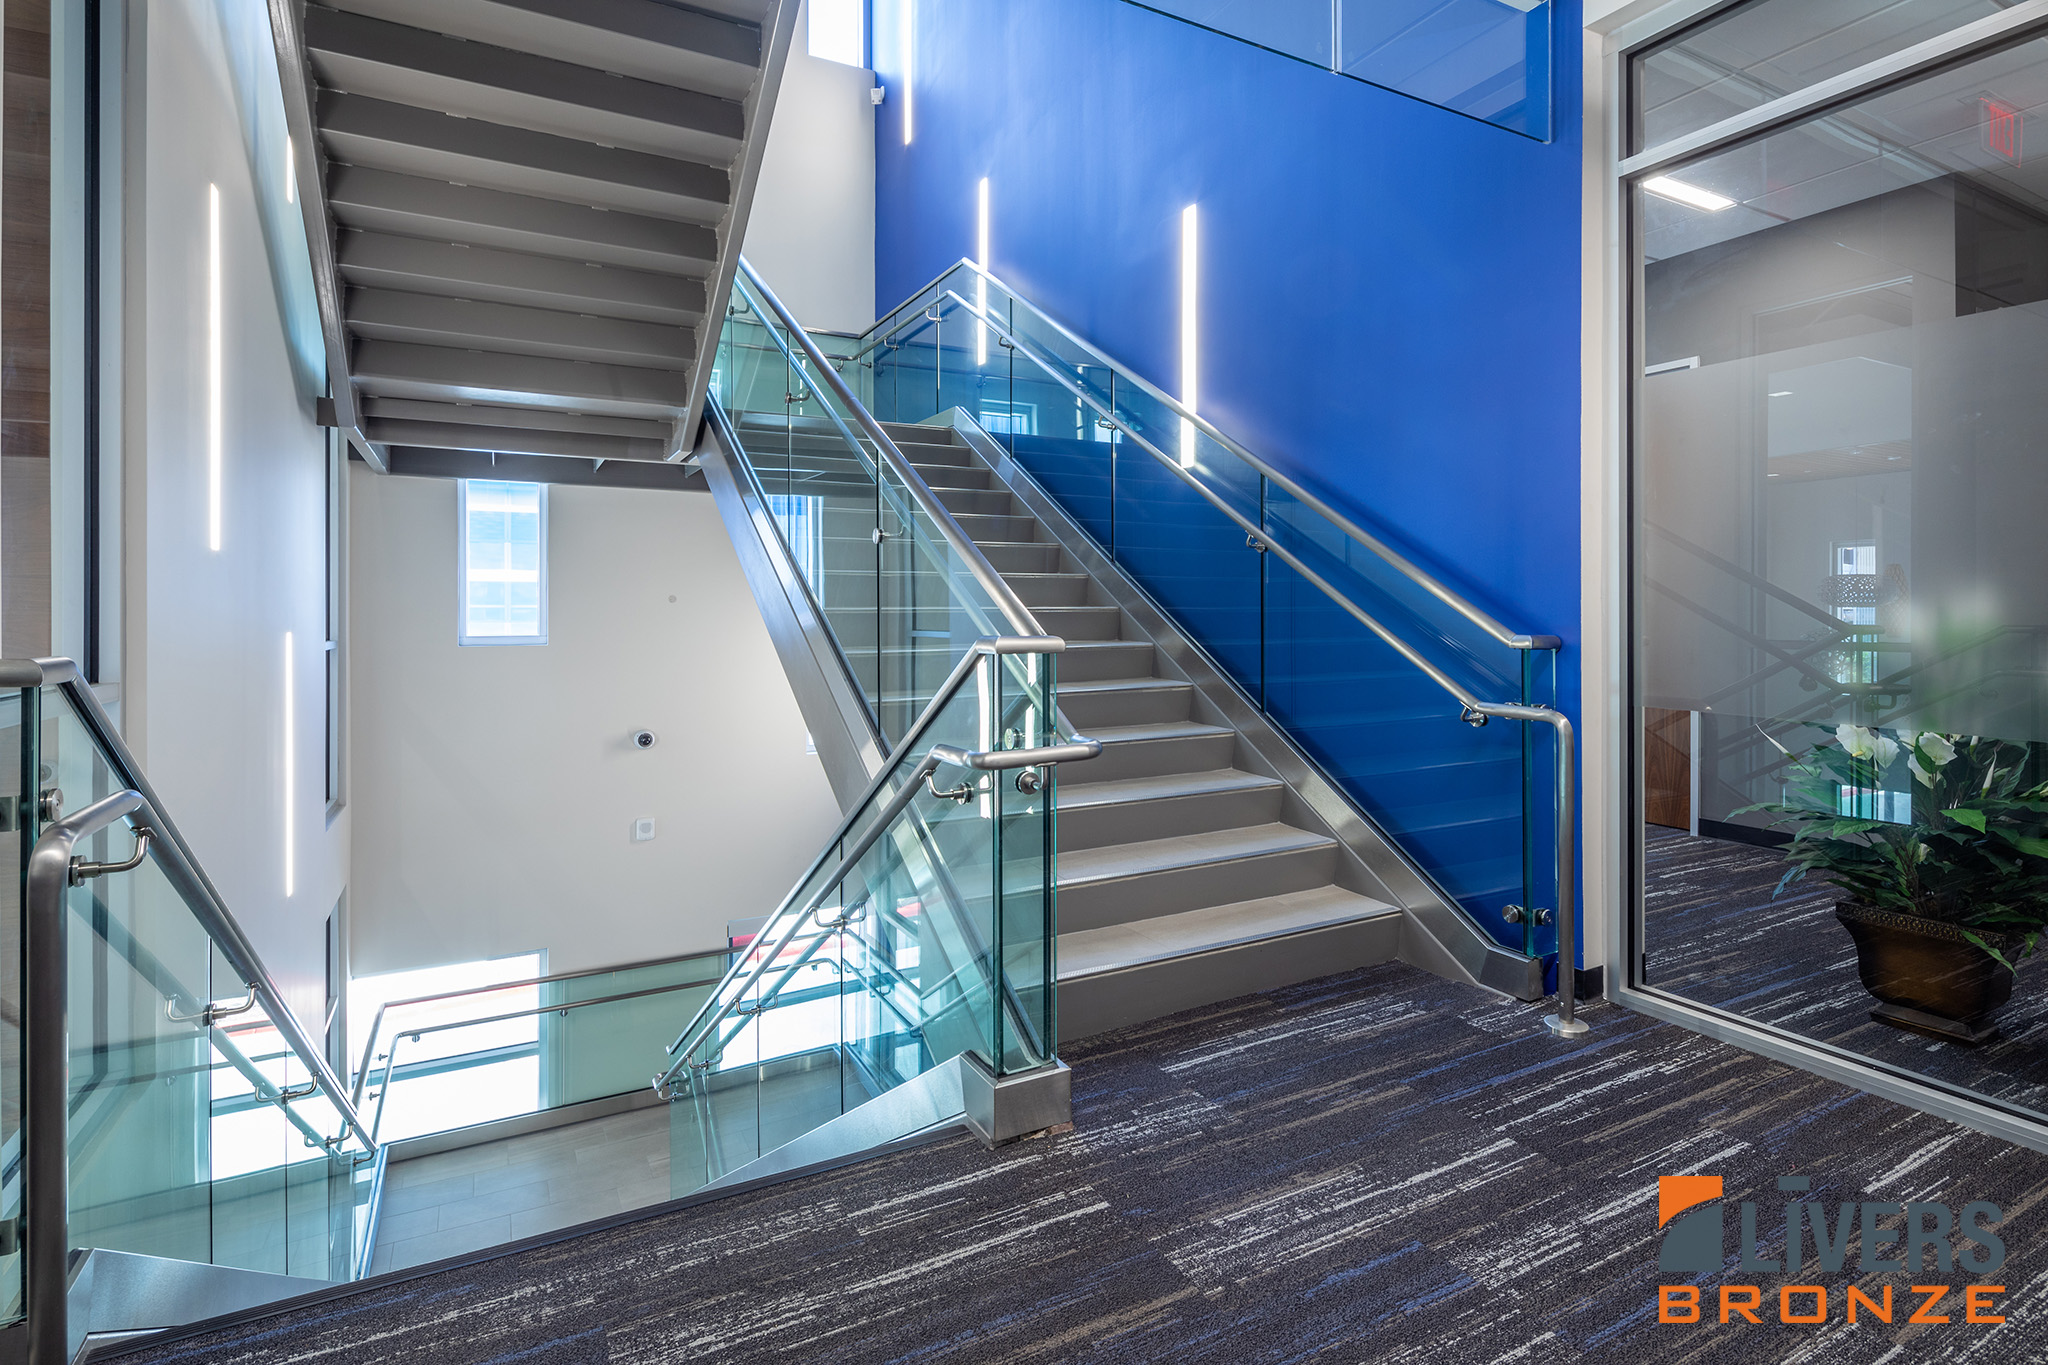 Livers Bronze Struct-U-Rail Commercial Glass Railing installed in San Antonio Independent School District Central Office Building is Made in the USA